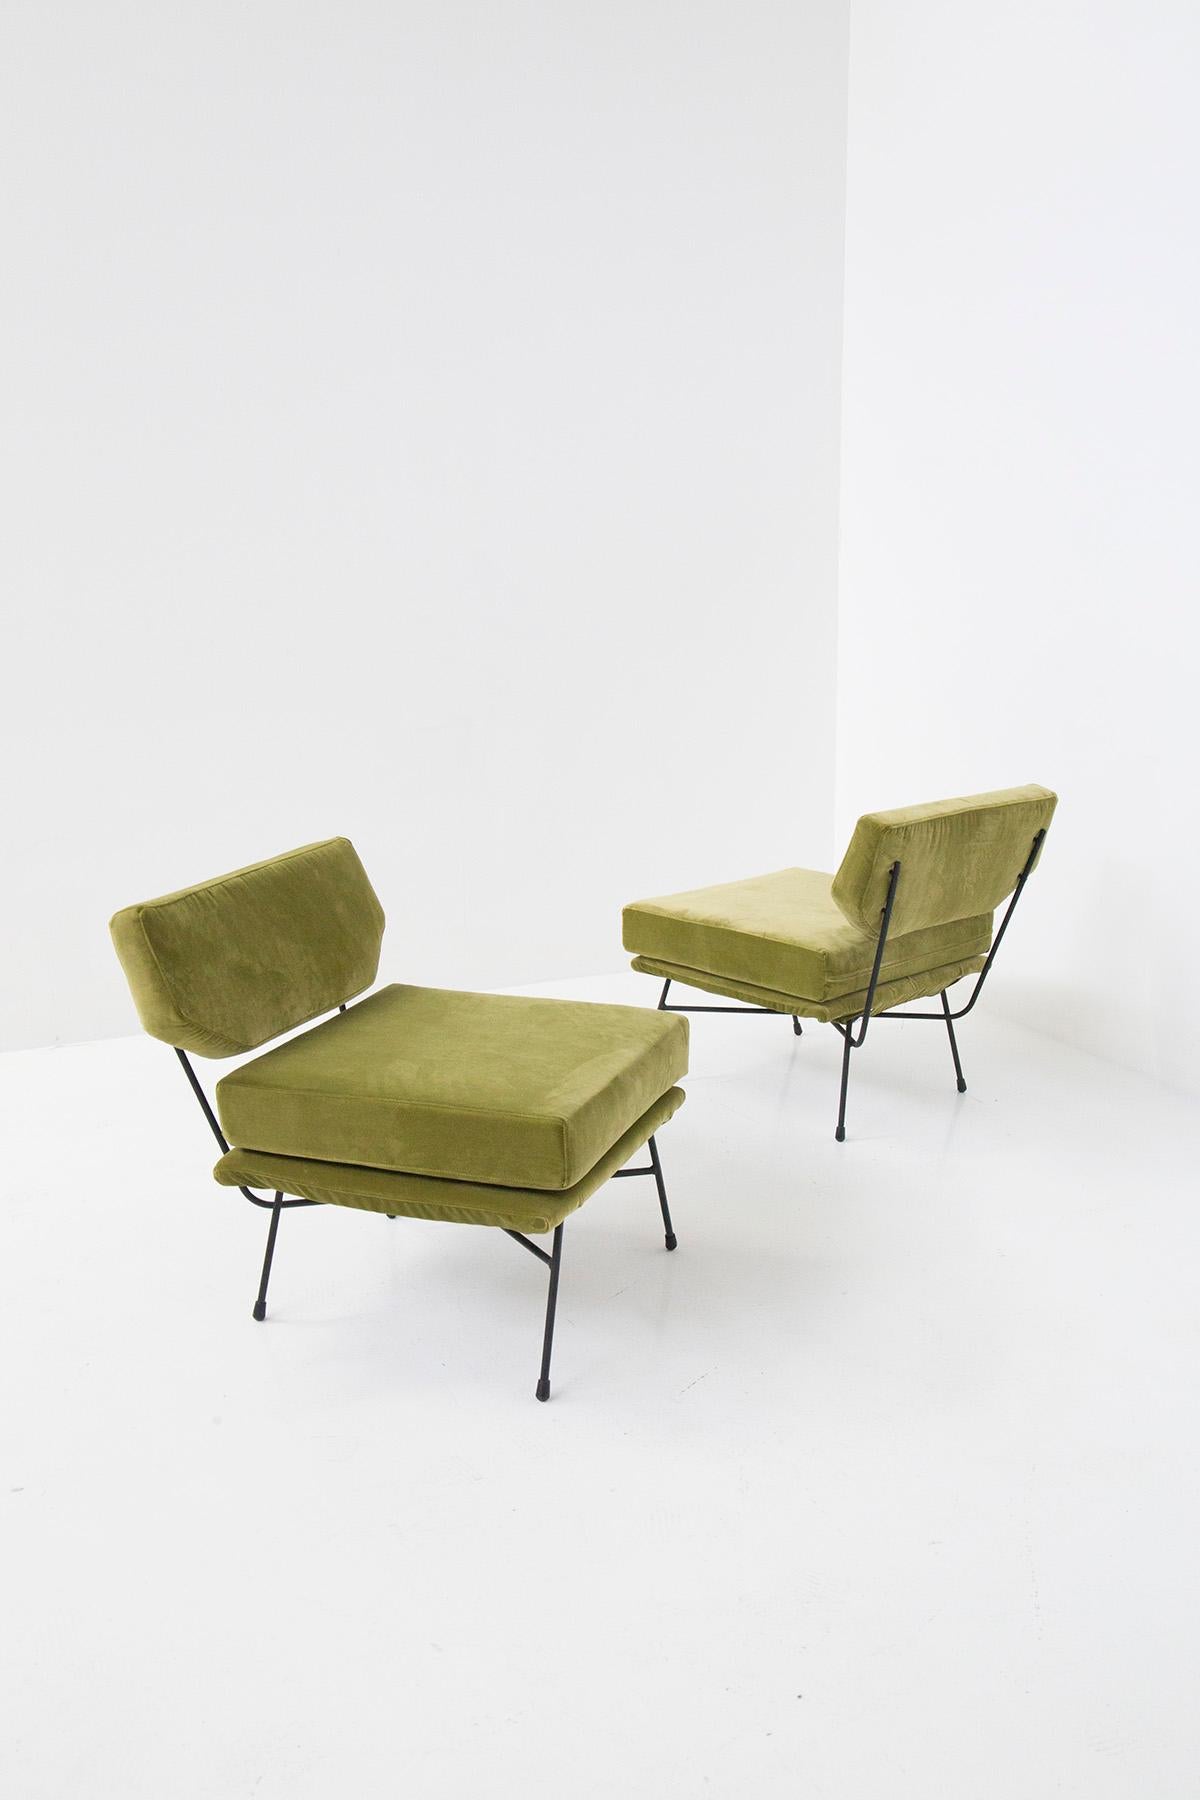 Pair of armchairs Model Elettra designed by Studio B.B.P.R. for the Arflex manufacture in 1953. Black metal tubular frame, seat and back upholstered in shaped polyurethane. The pair of armchairs has been upholstered in an elegant green